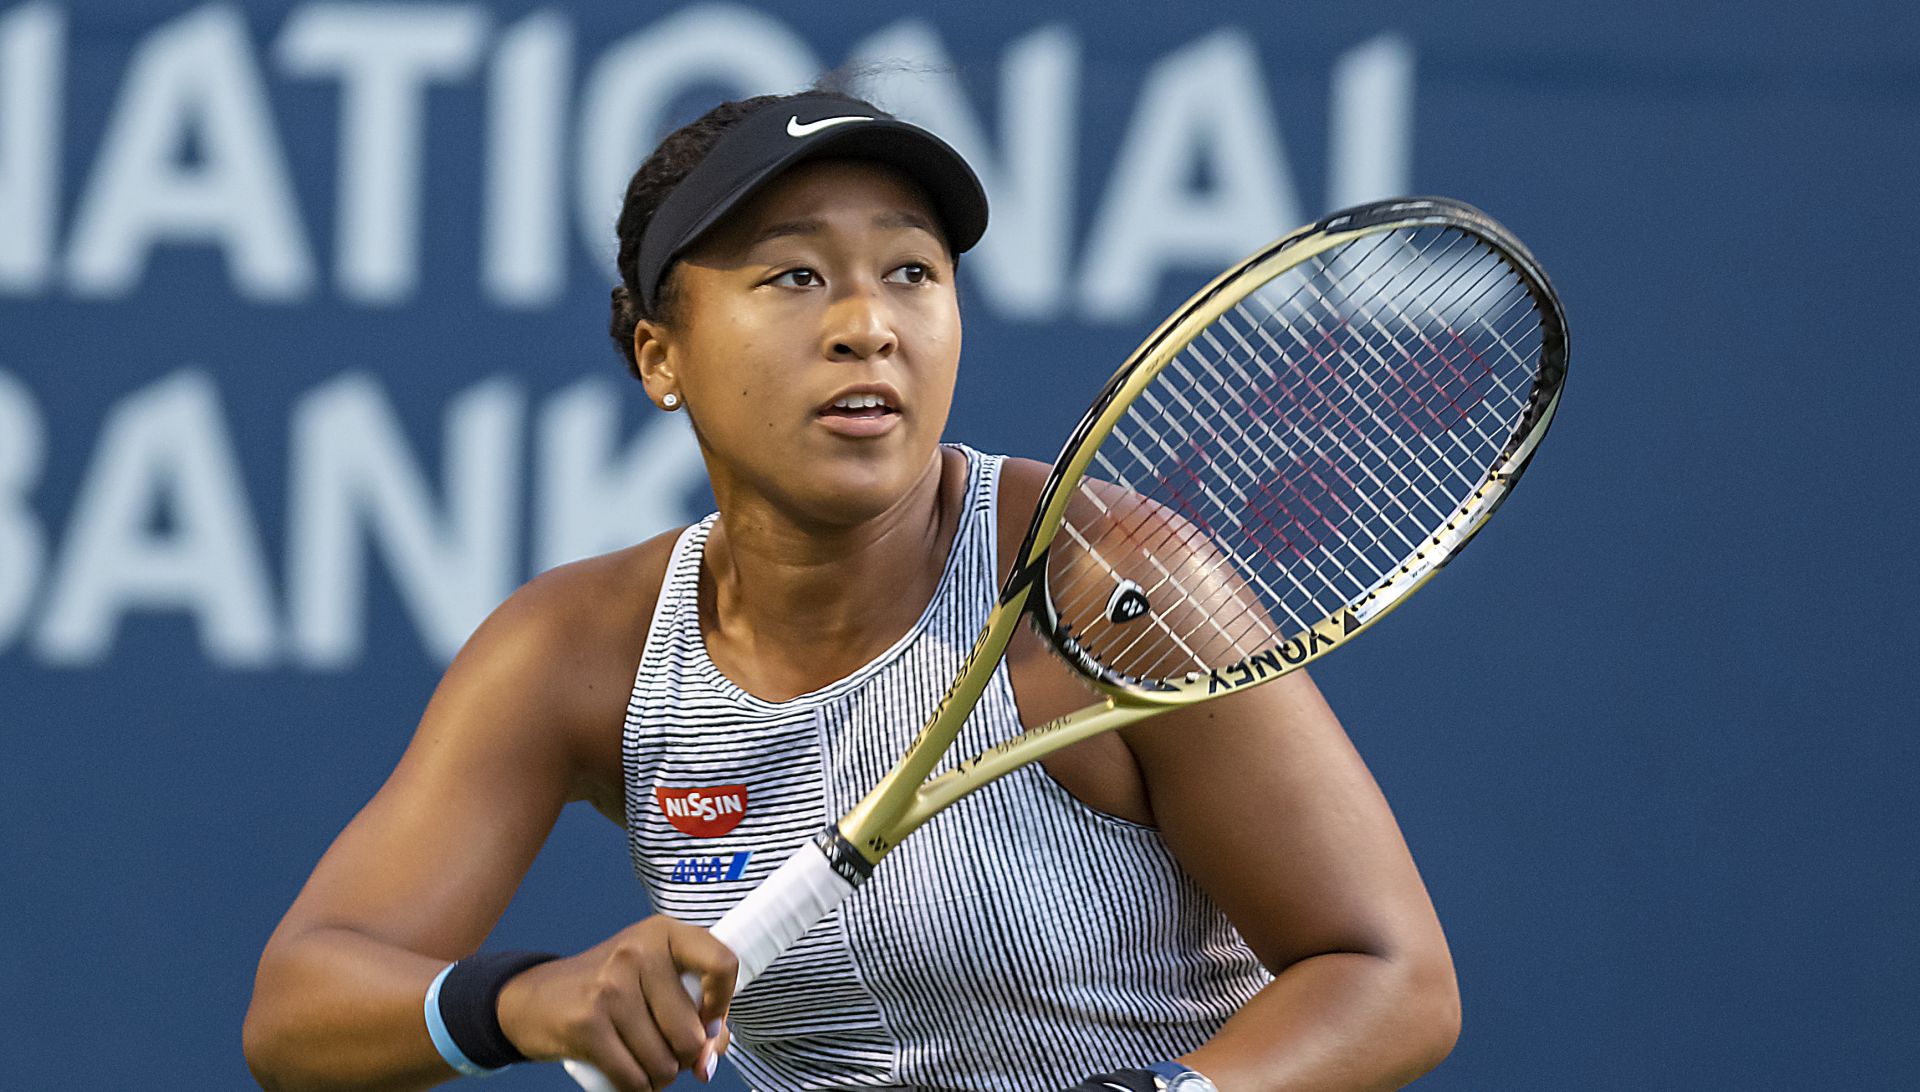 epa07765214 Naomi Osaka of Japan in action against Serena Williams of the USA during their quarterfinals match at the Rogers Cup tennis tournament in Toronto, Canada, 09 August 2019.  EPA/WARREN TODA